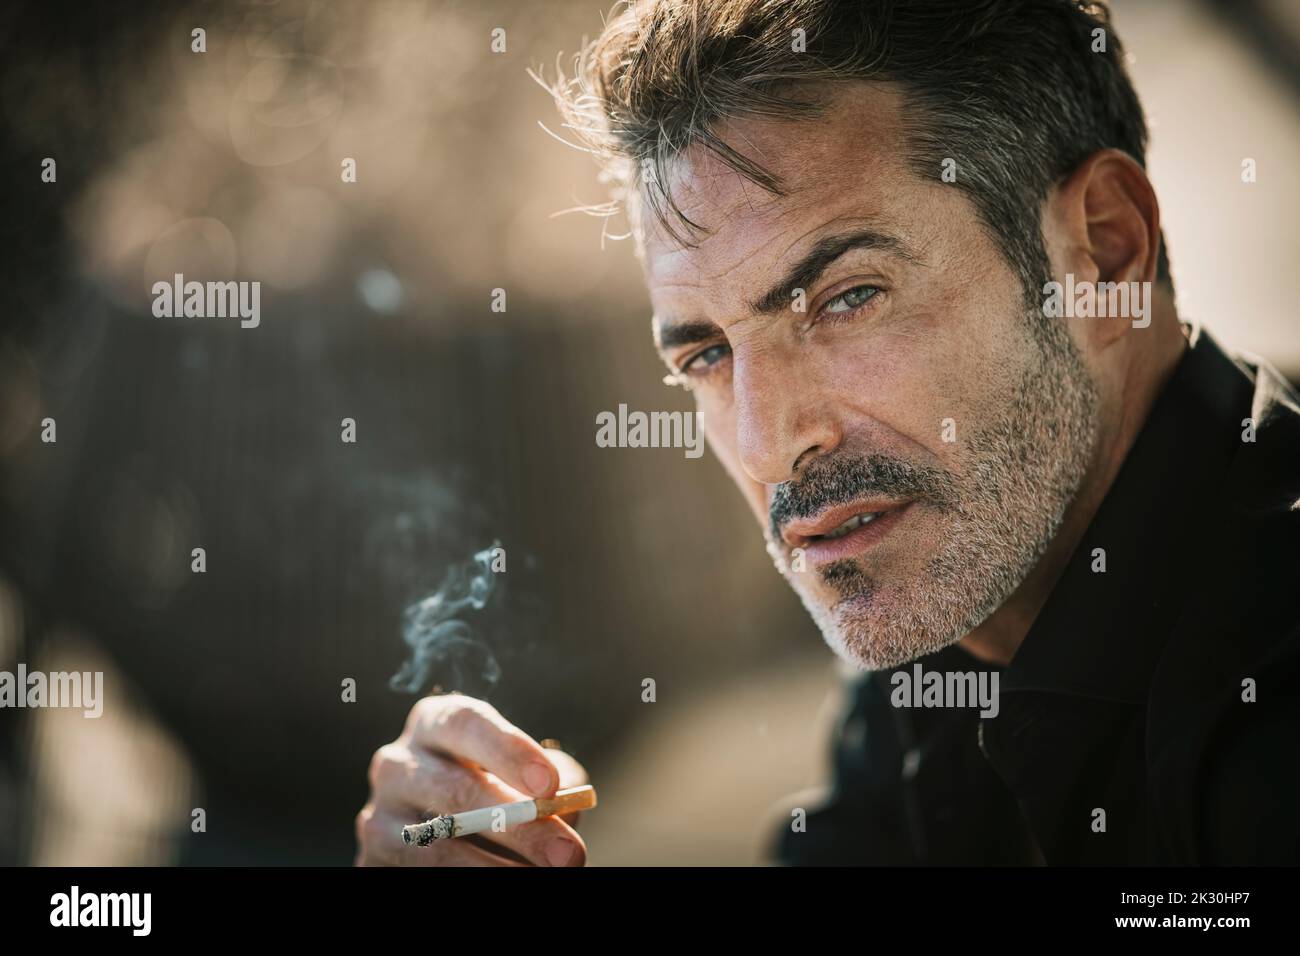 Handsome man with hair stubble smoking cigarette Stock Photo